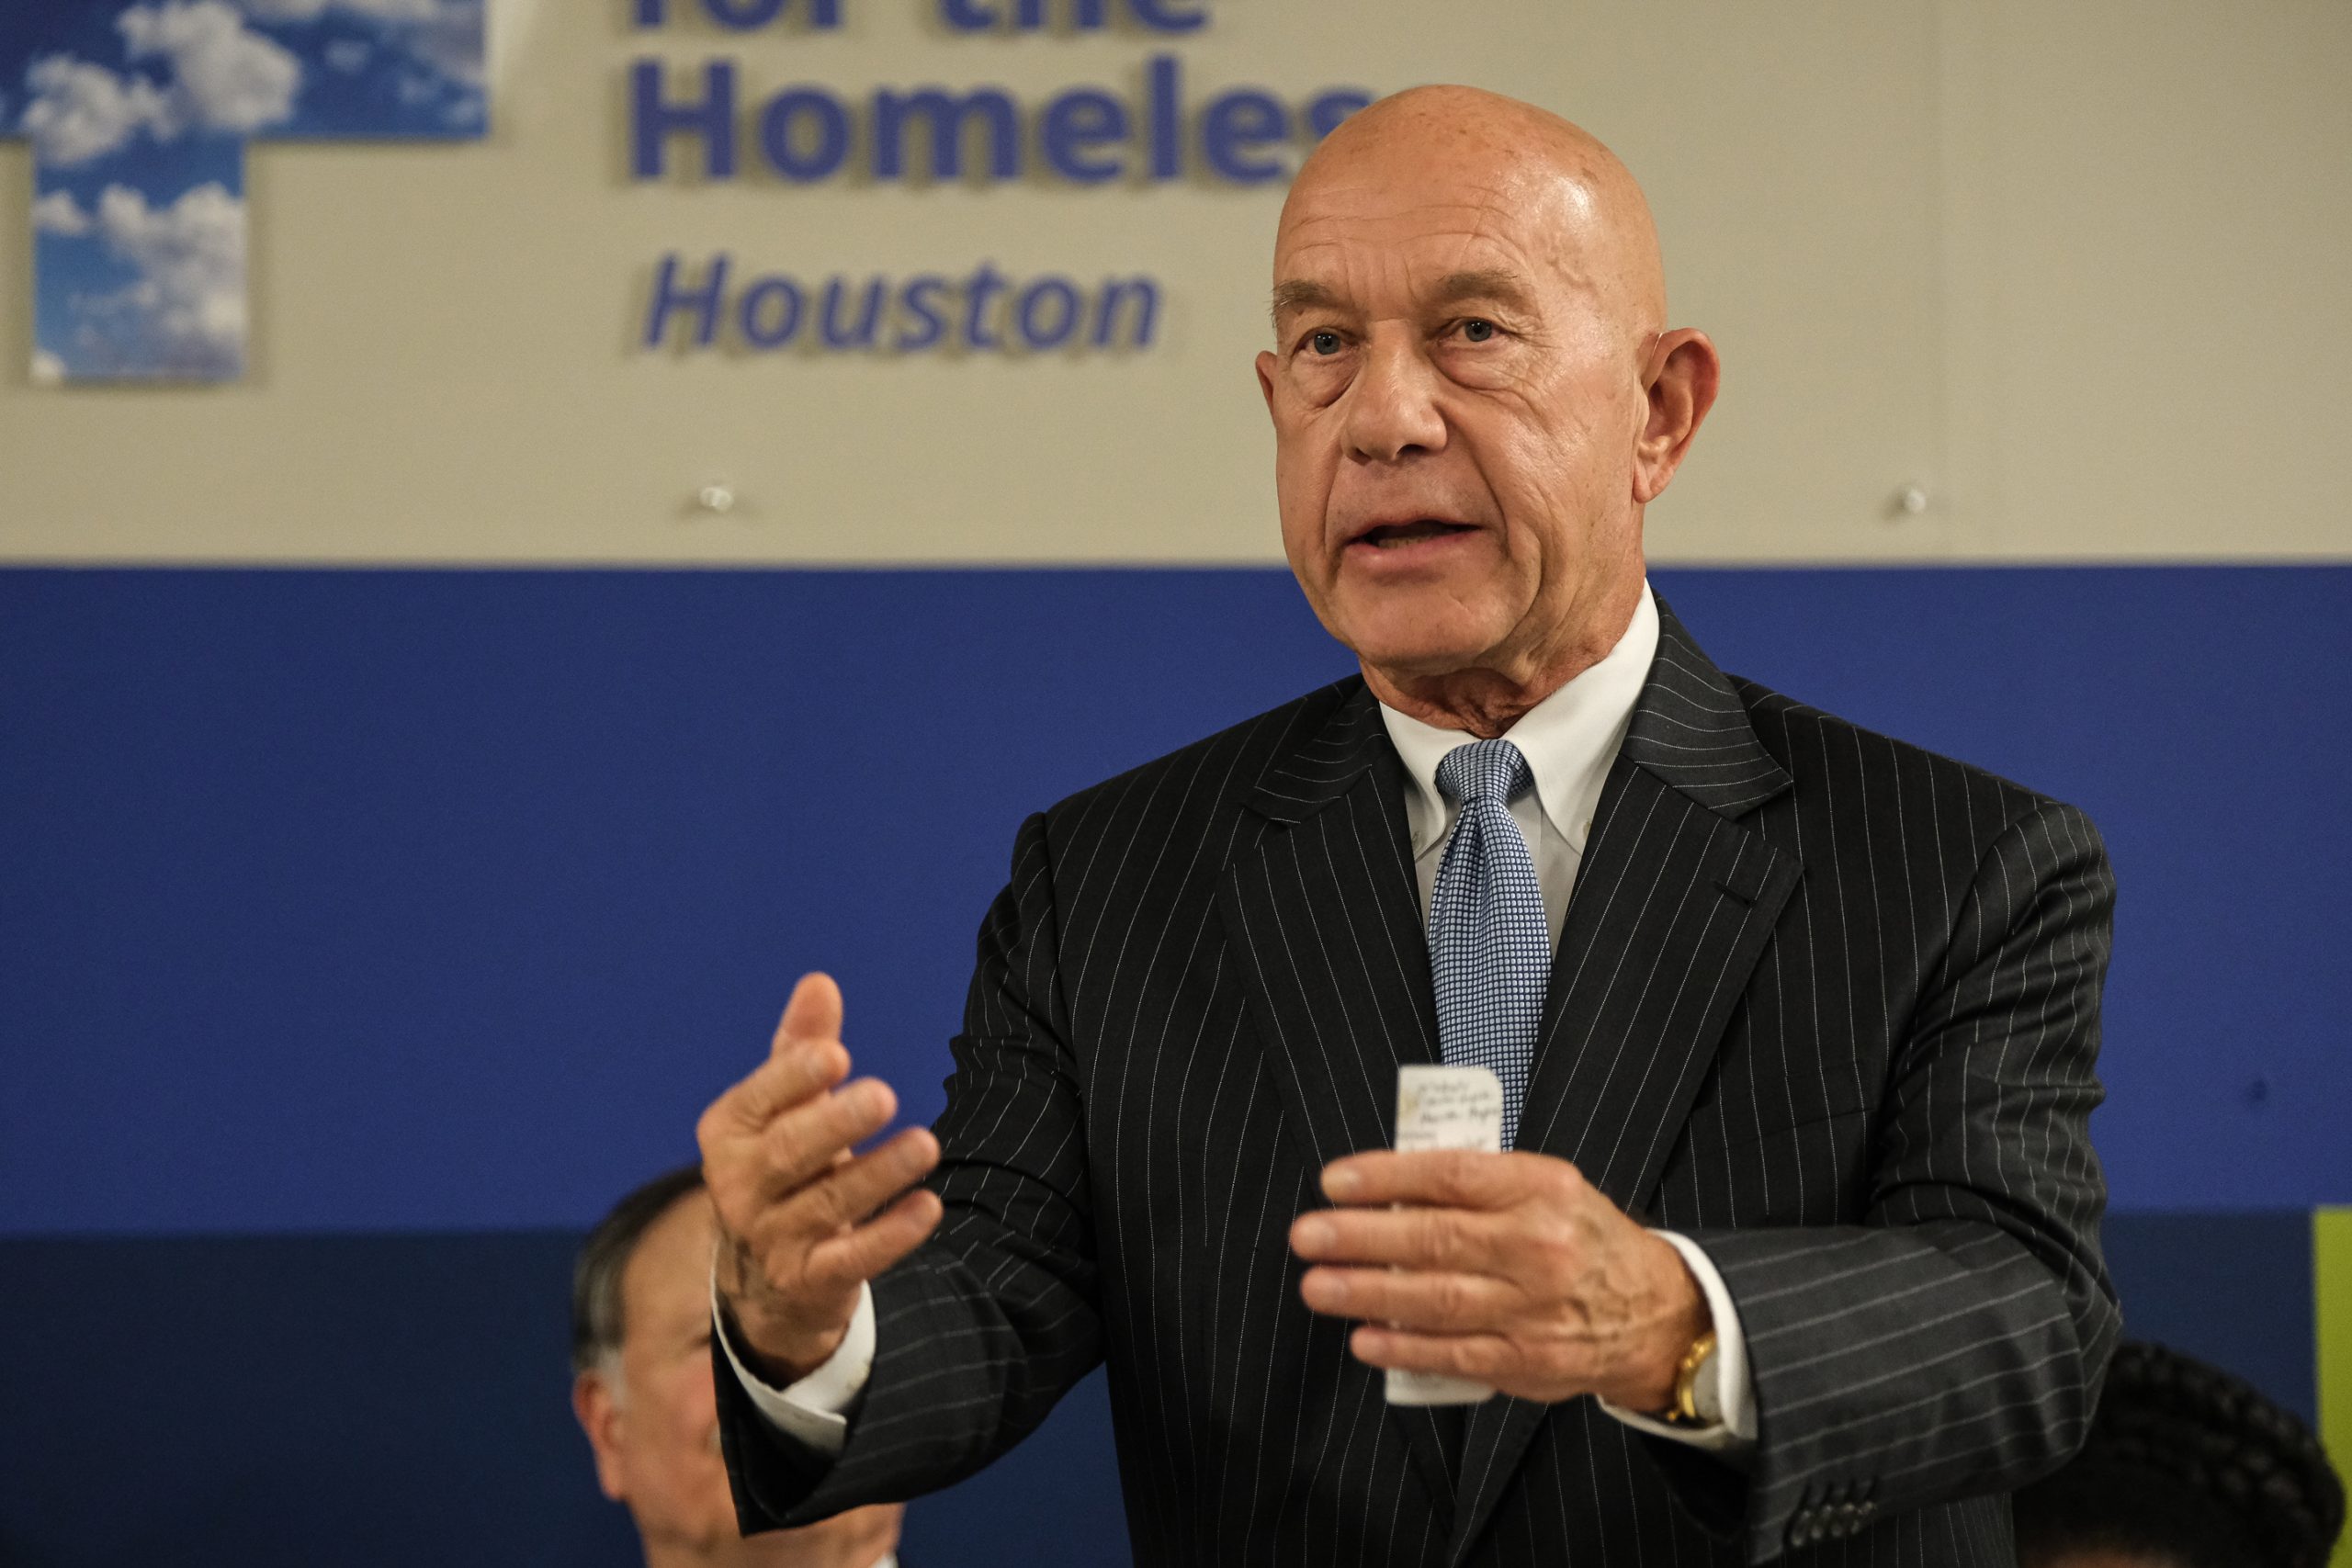 At Healthcare for the Homeless, mayoral candidate Texas Senator John Whitmire shares remarks during a forum for mayoral candidates to share their plan to combat Houston homelessness